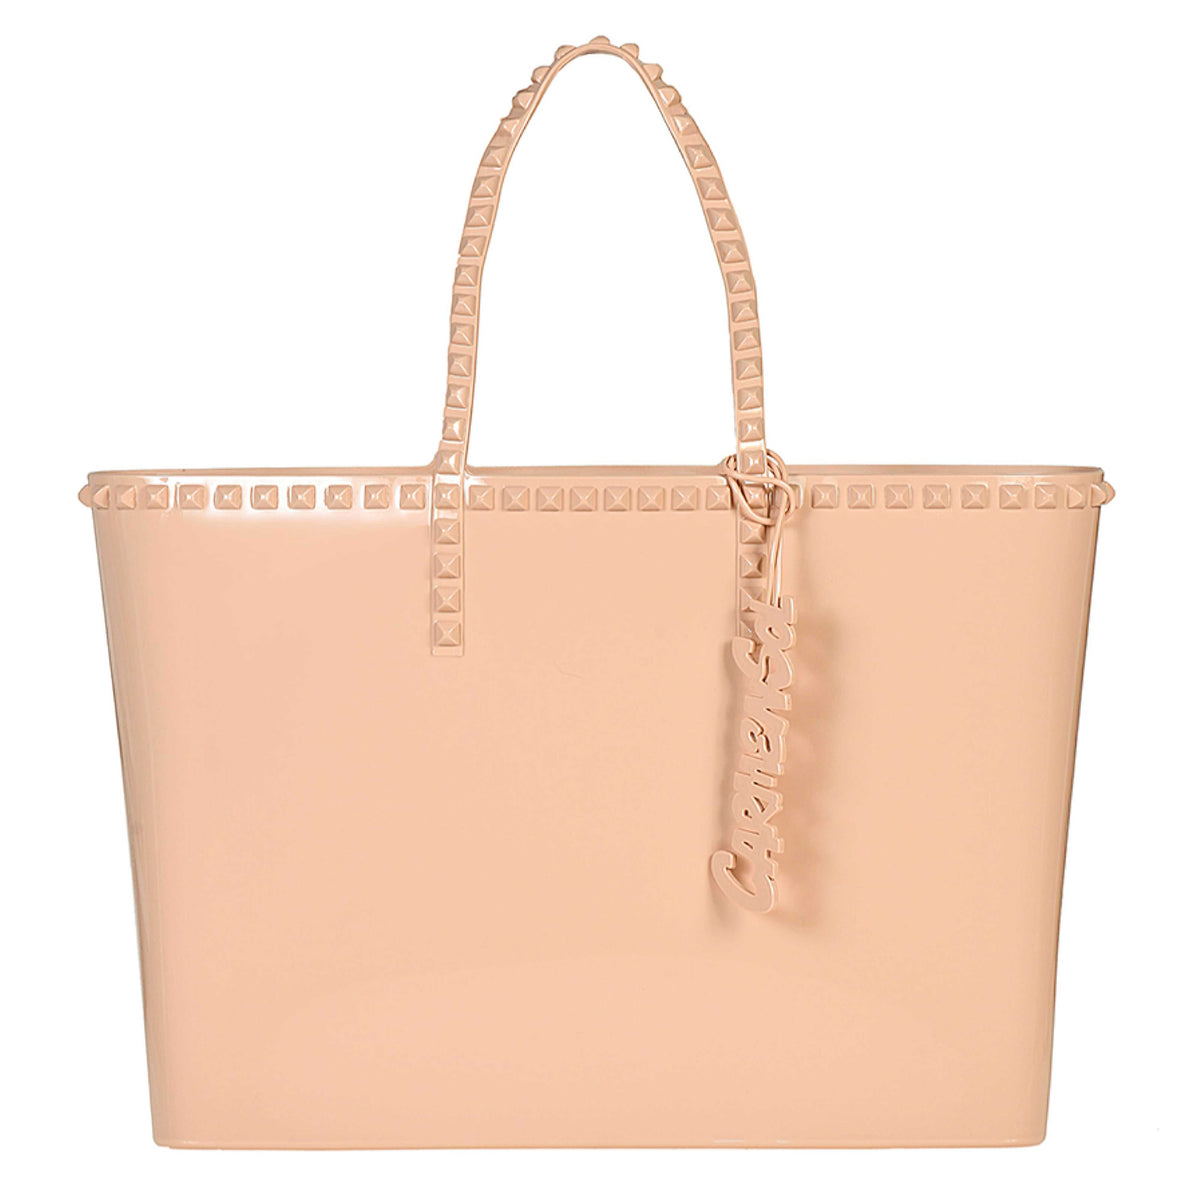 Jelly tote bags for women in color blush carmen sol